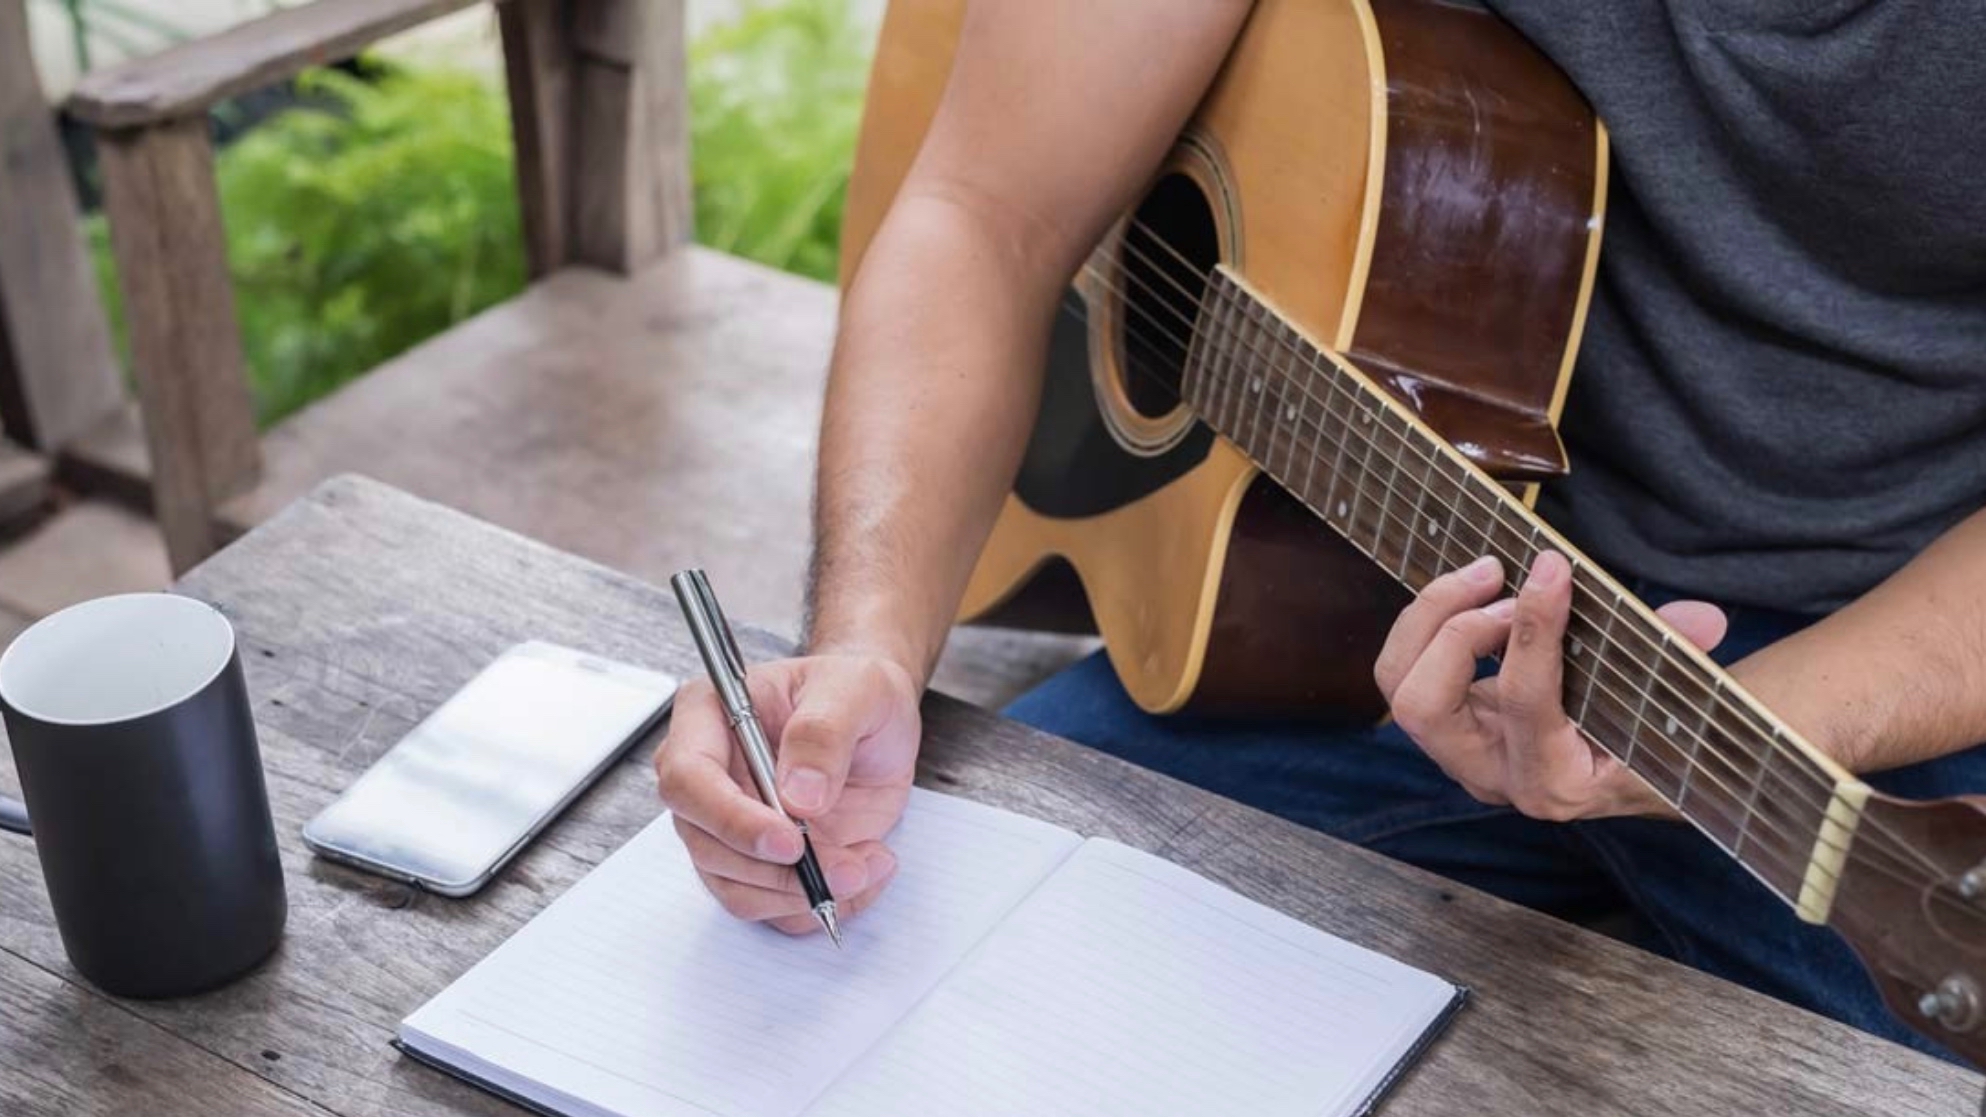 Songwriting Lessons